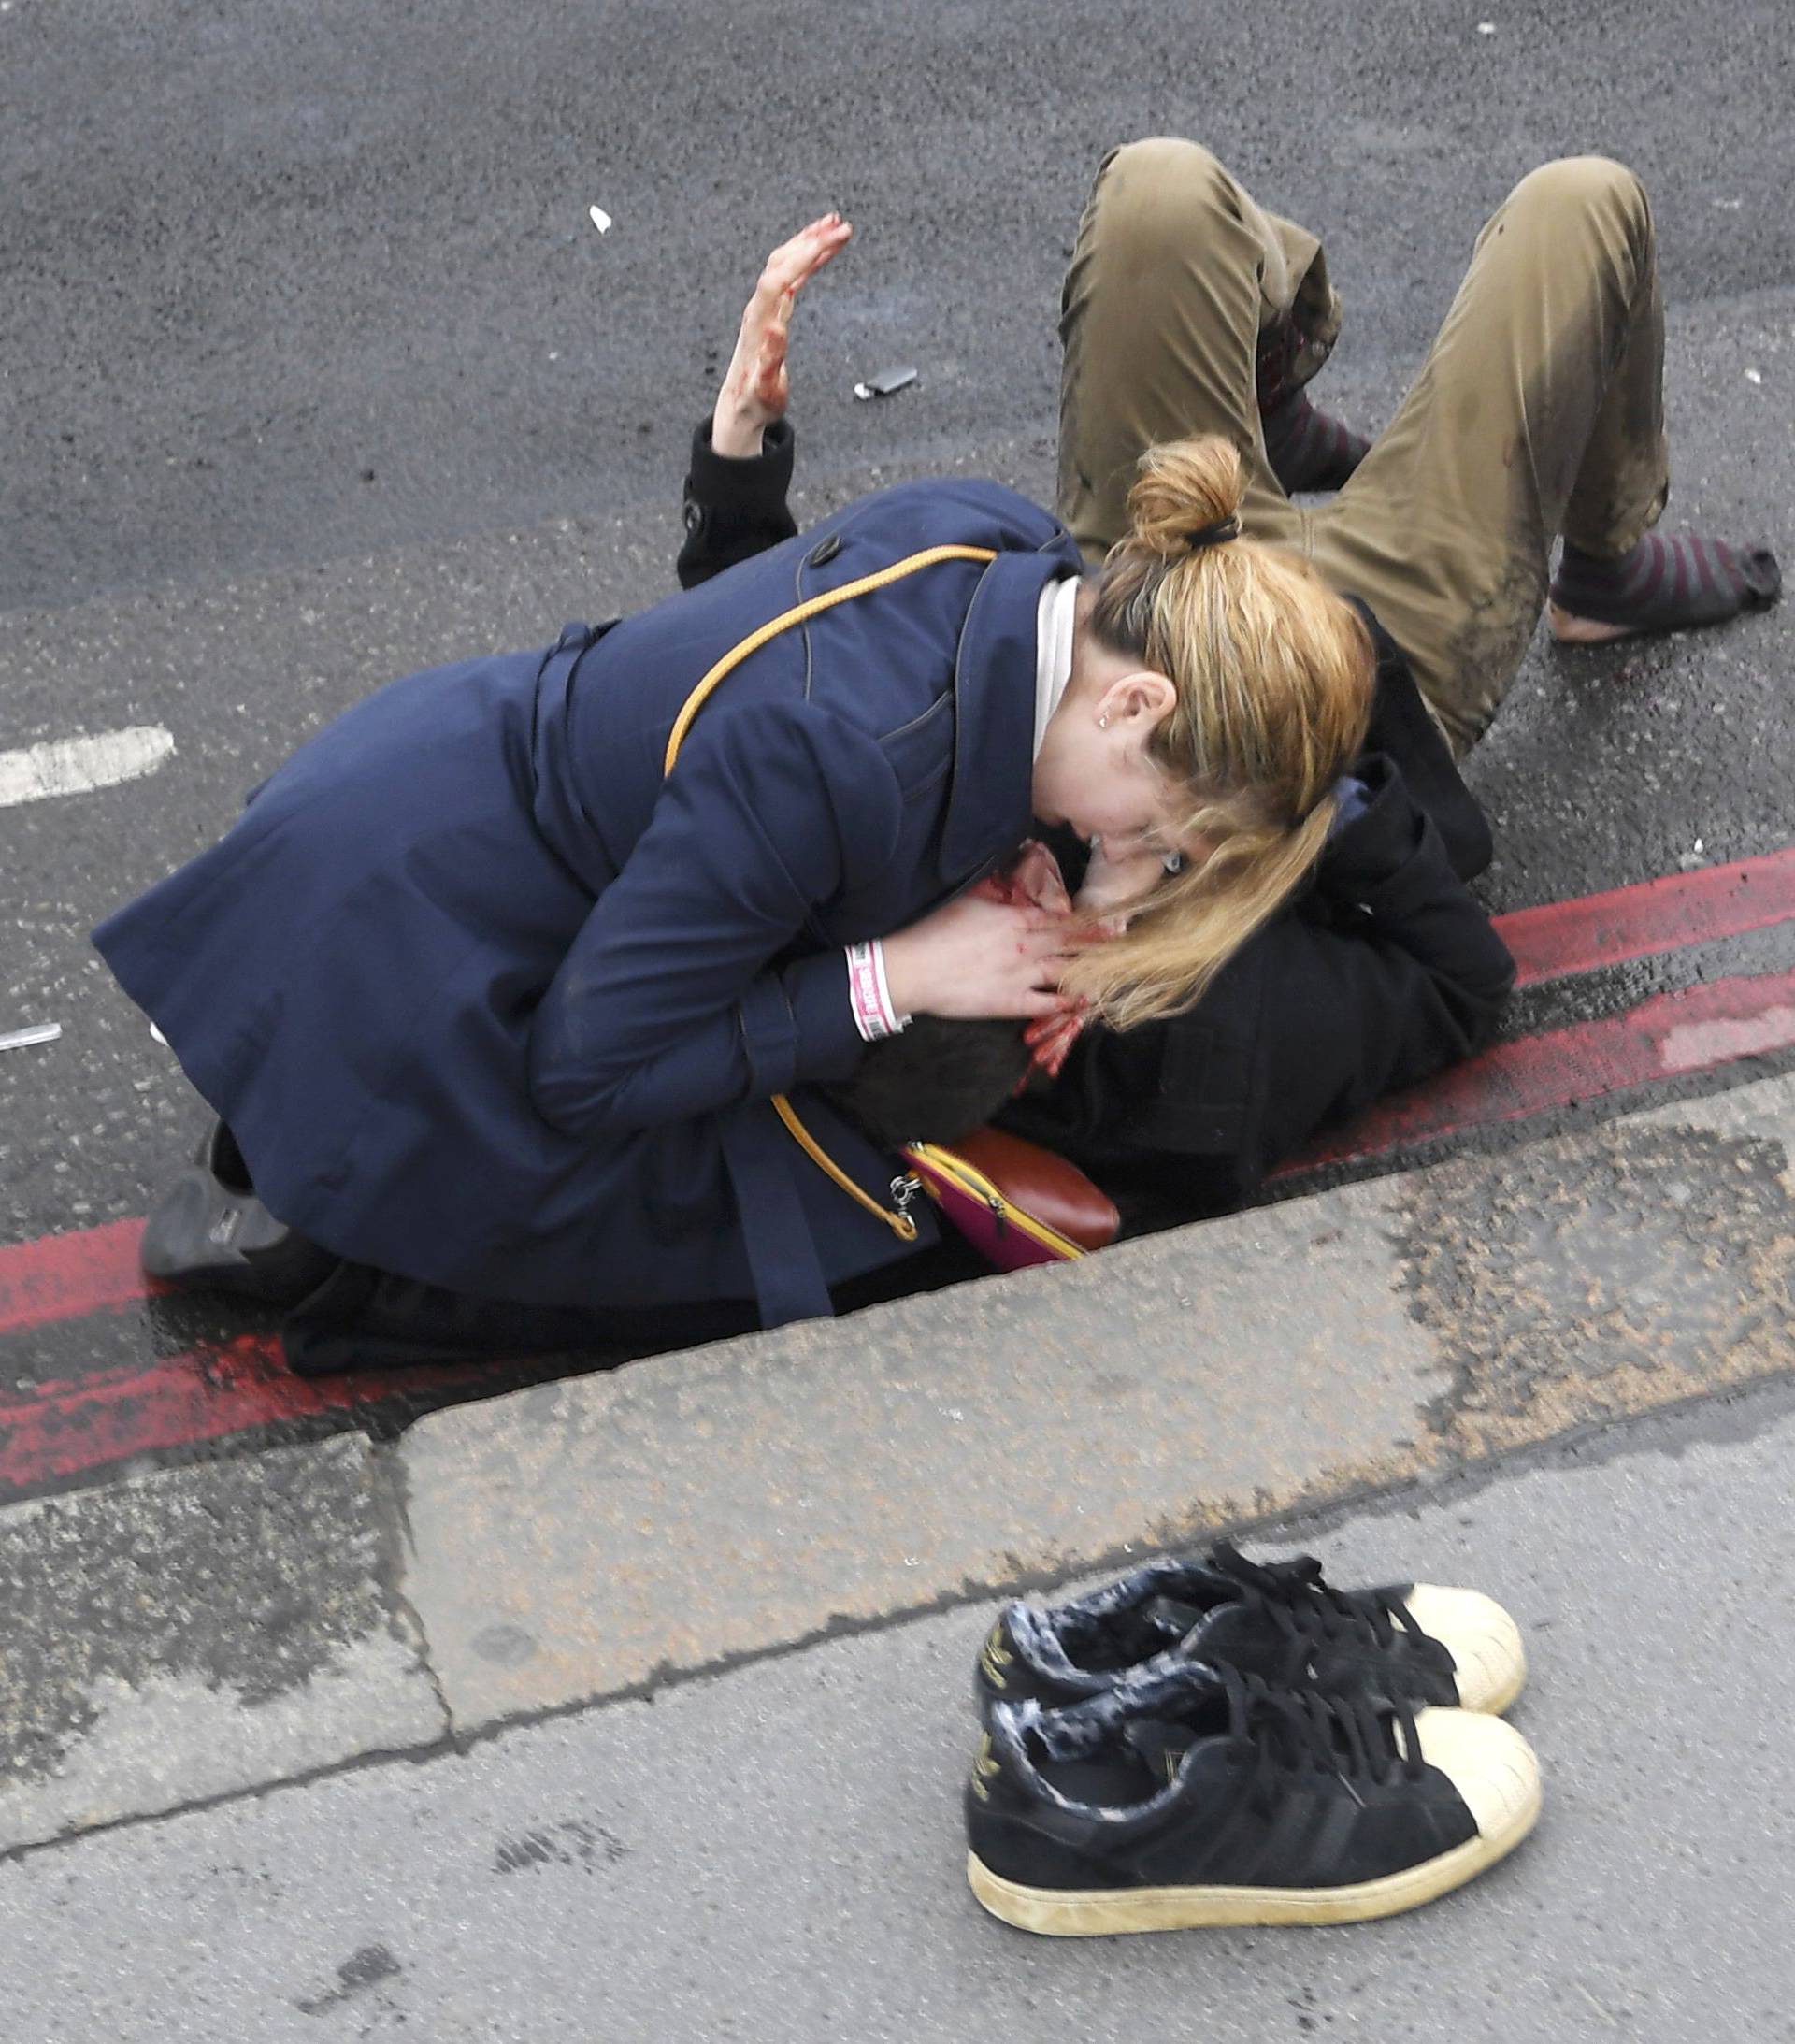 A woman assist an injured person after an incident on Westminster Bridge in London